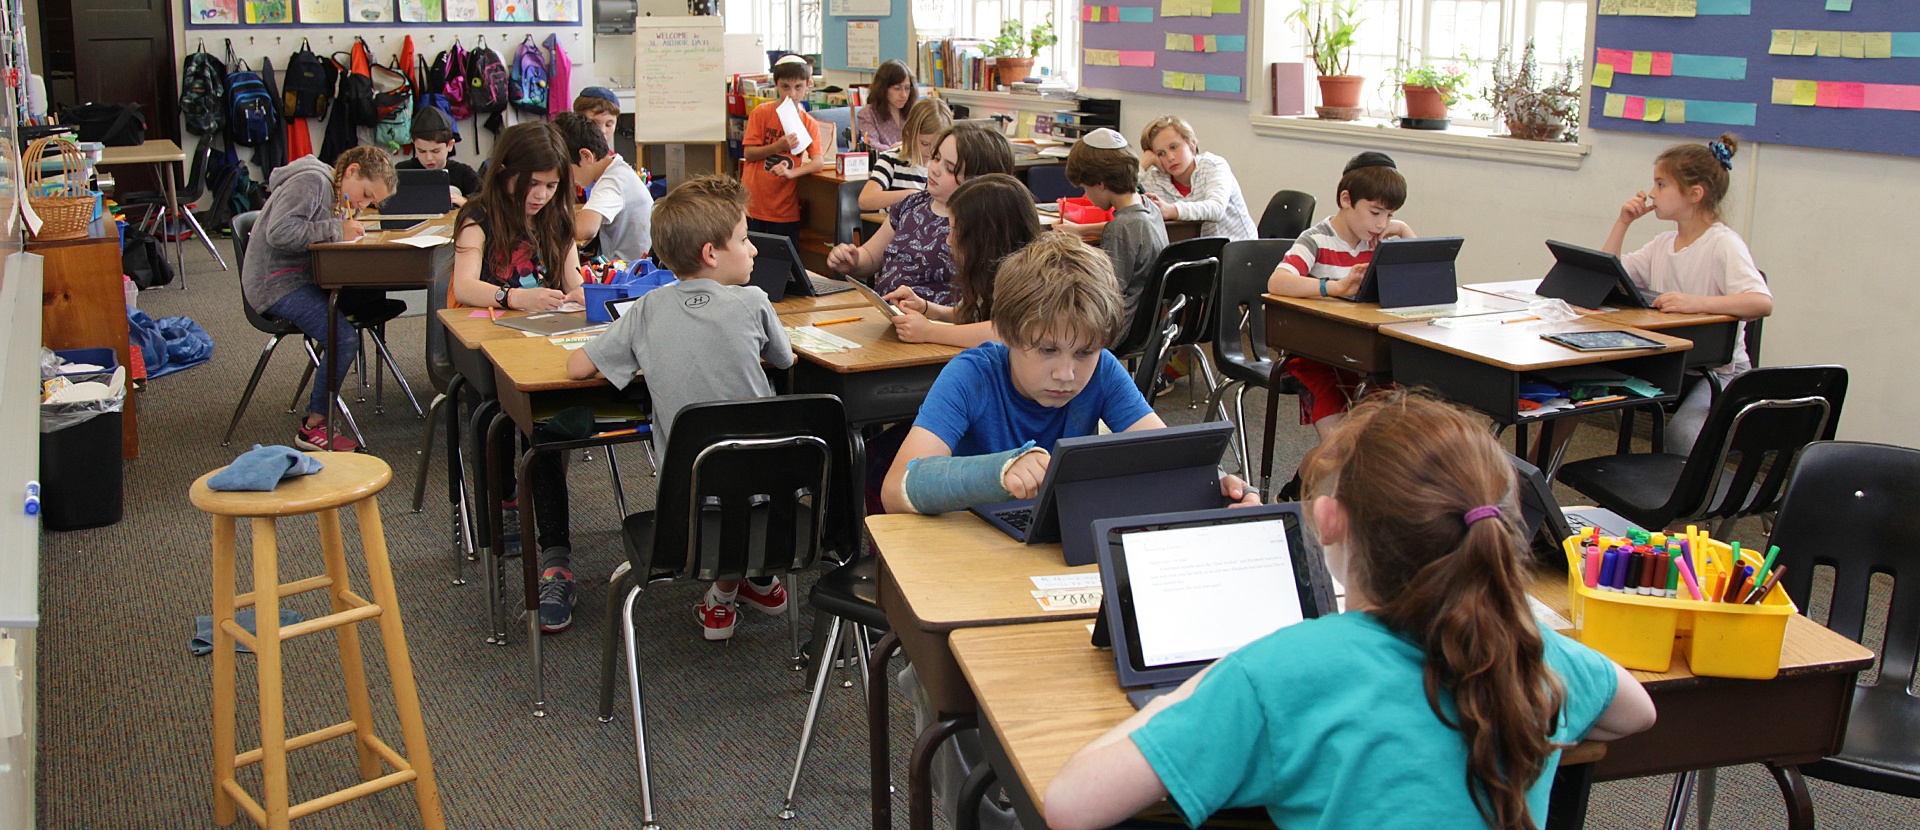 Perelman classroom filled with students each using iPad tablets